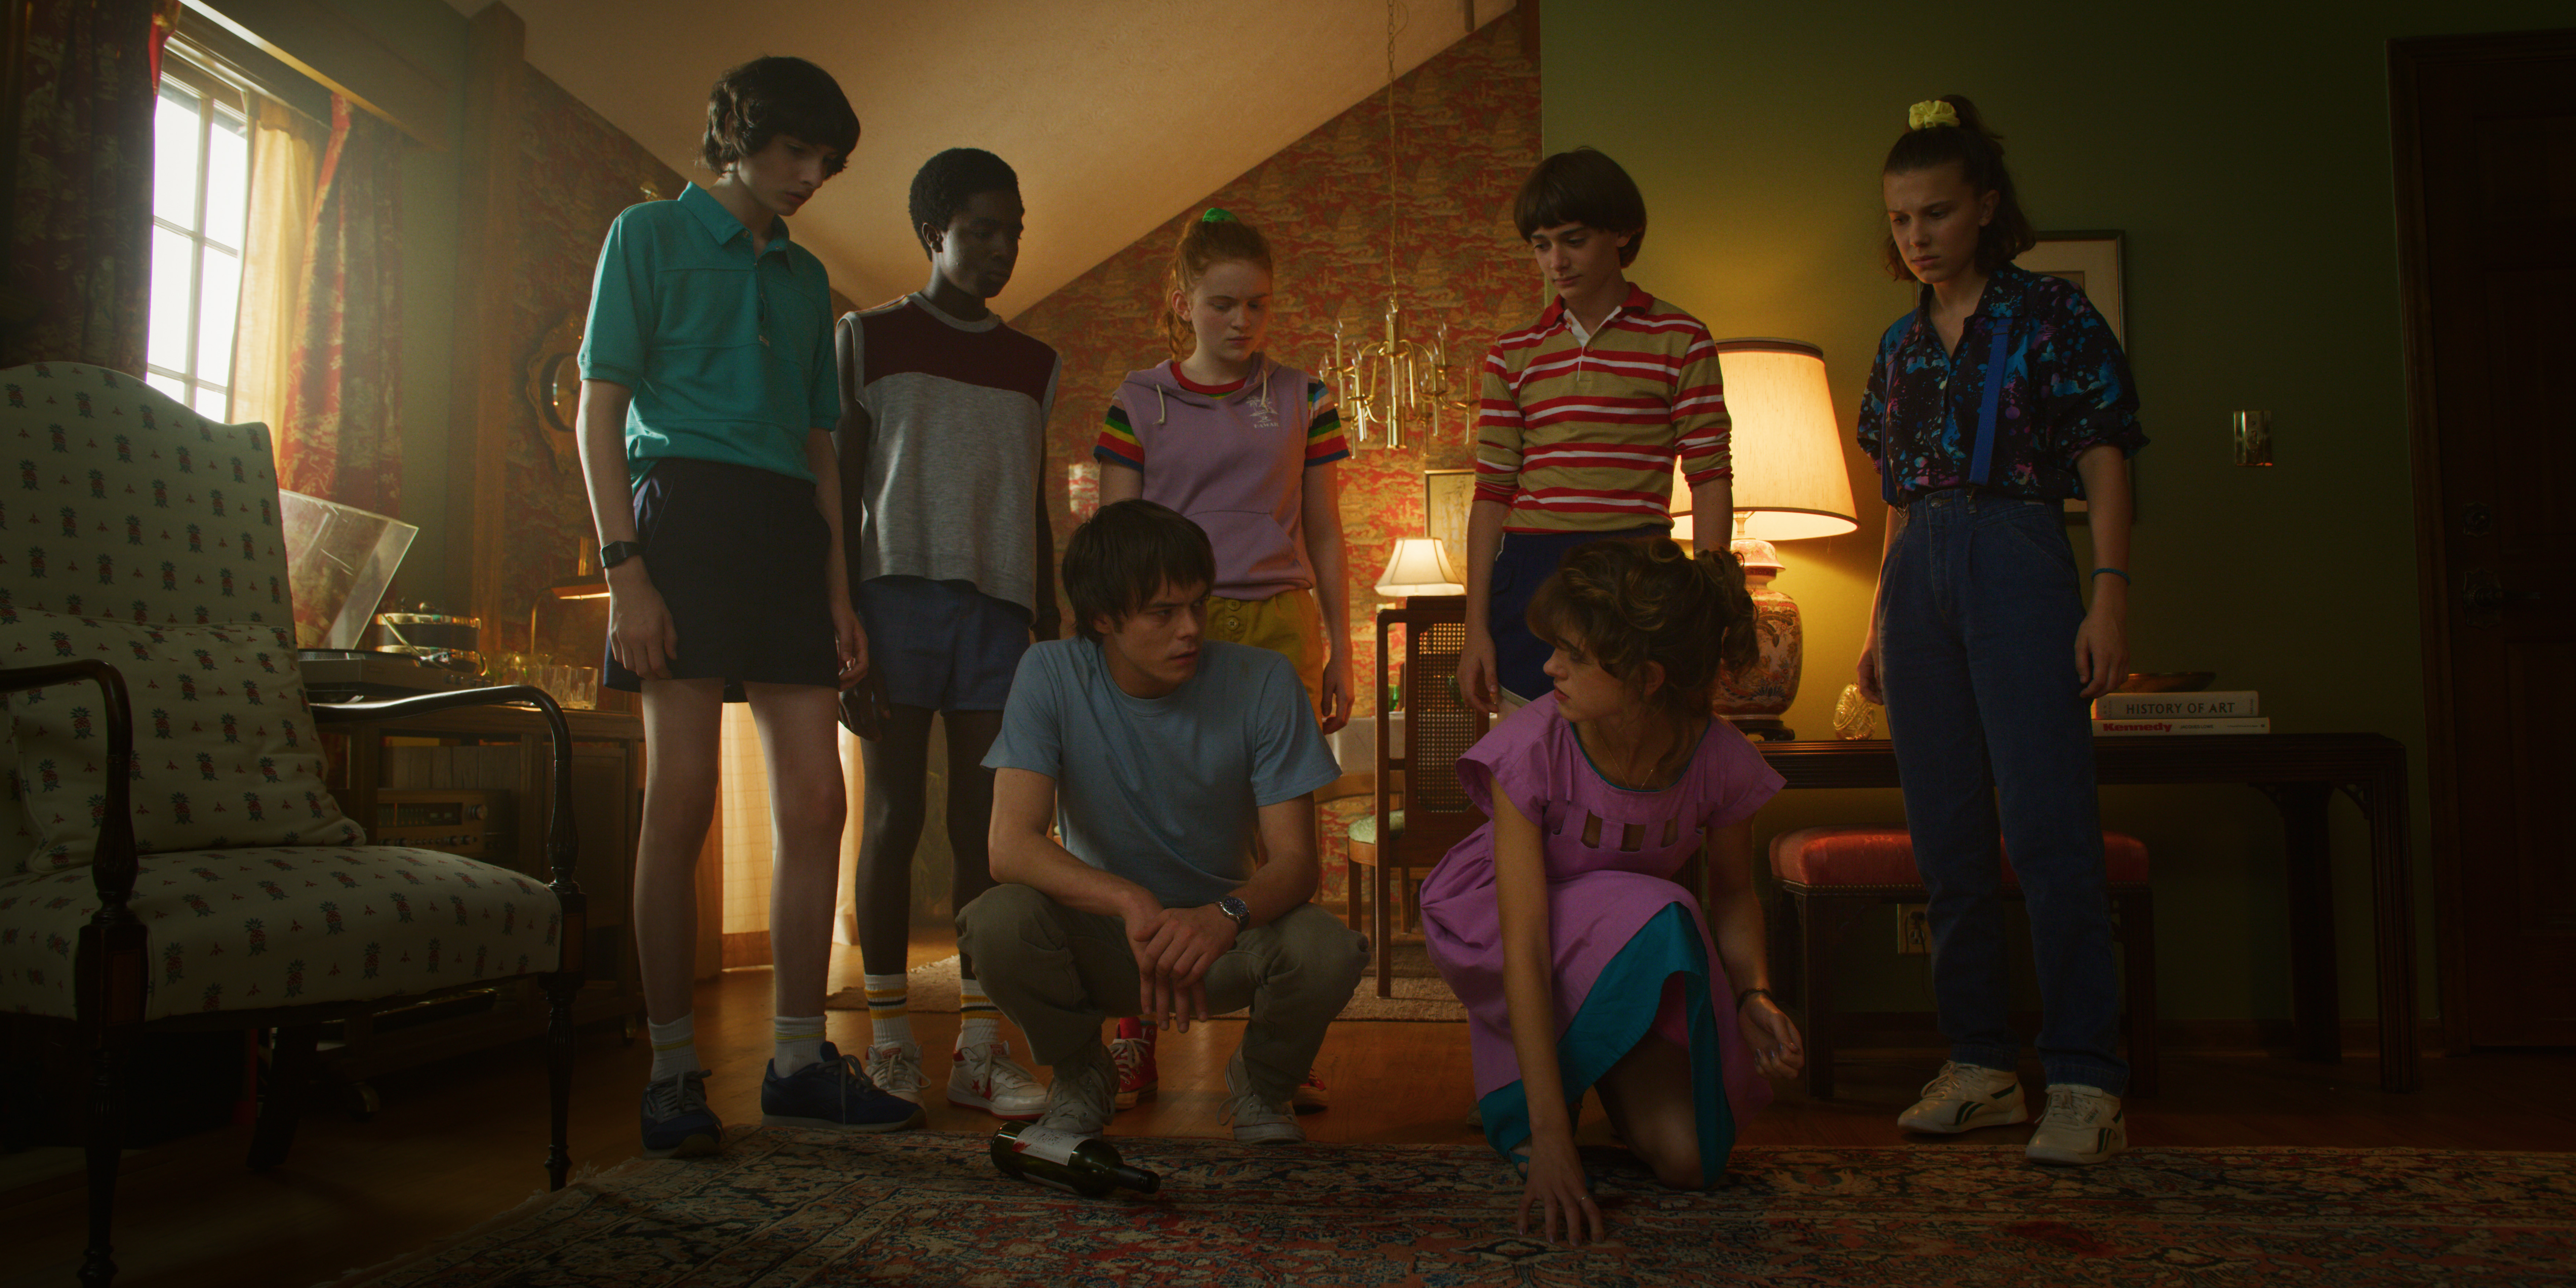 Mike, Lucas, Max, Jonathan, Will, El, and Nancy in a living room in Stranger Things season 3